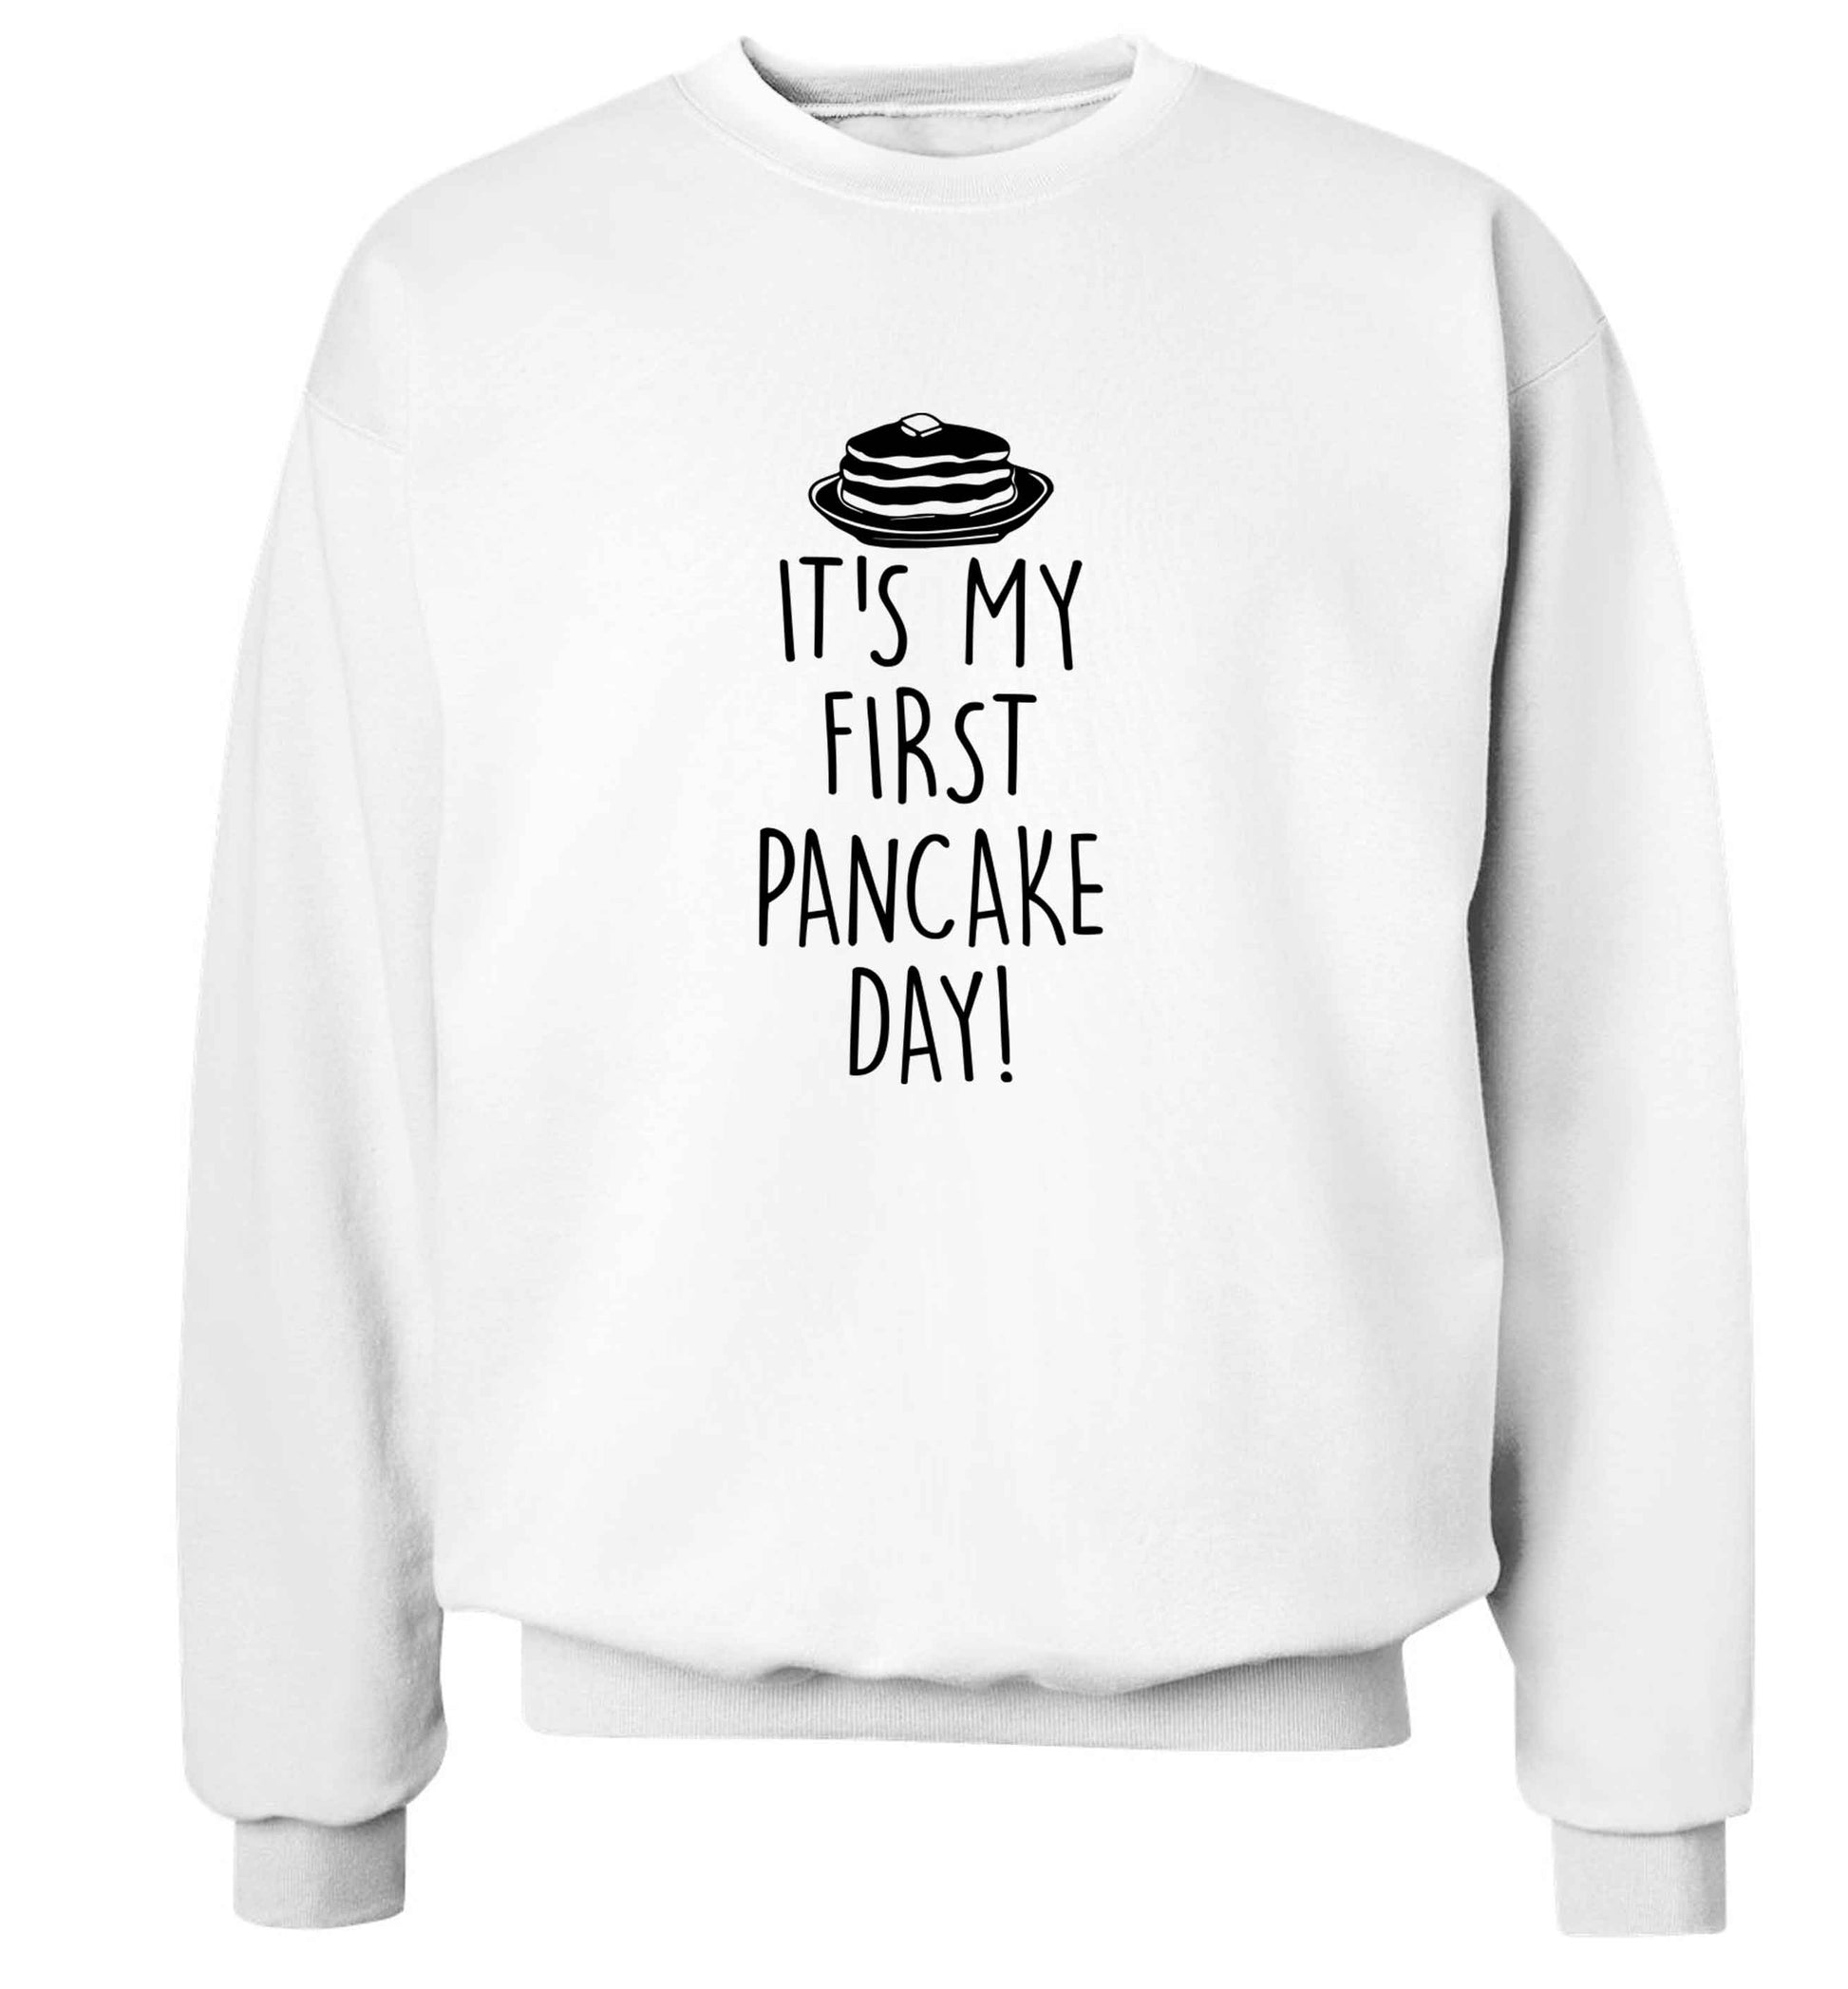 It's my first pancake day adult's unisex white sweater 2XL